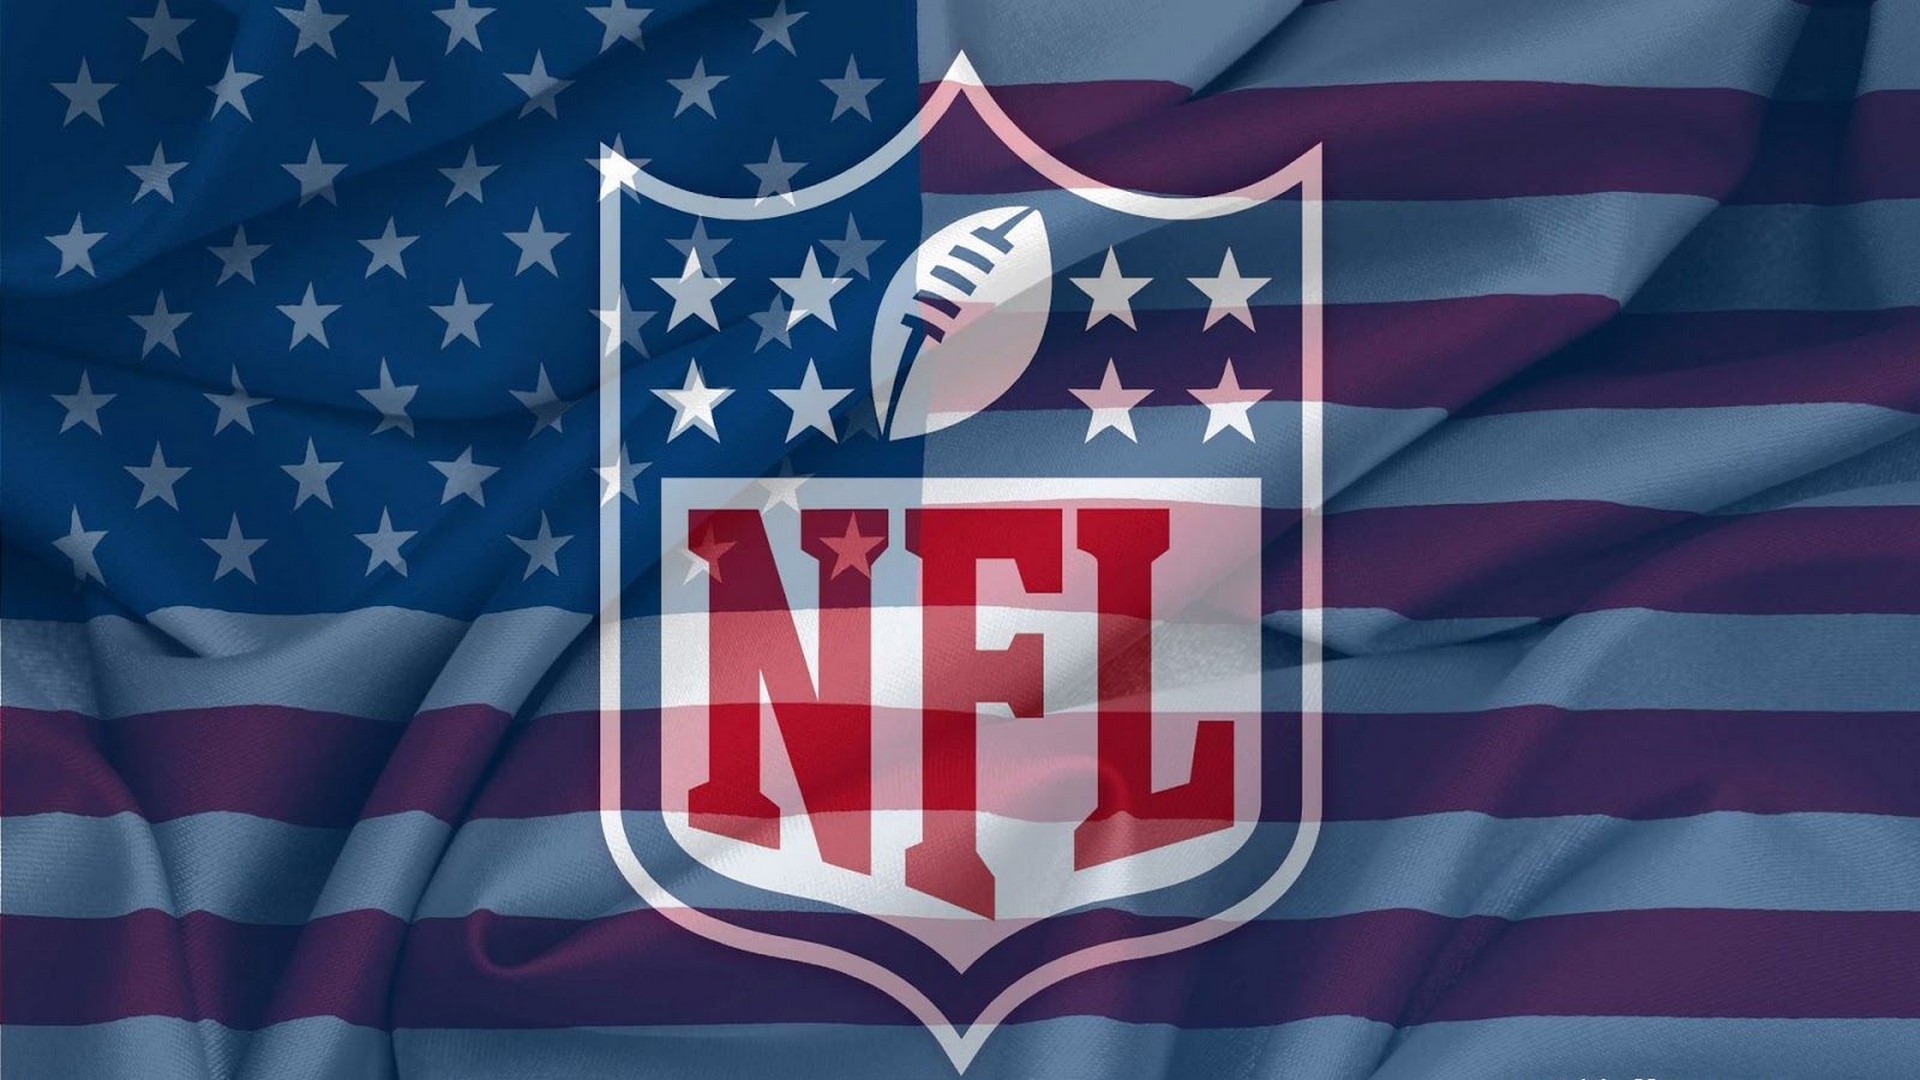 NFL Wallpaper For Mac Backgrounds 1920x1080